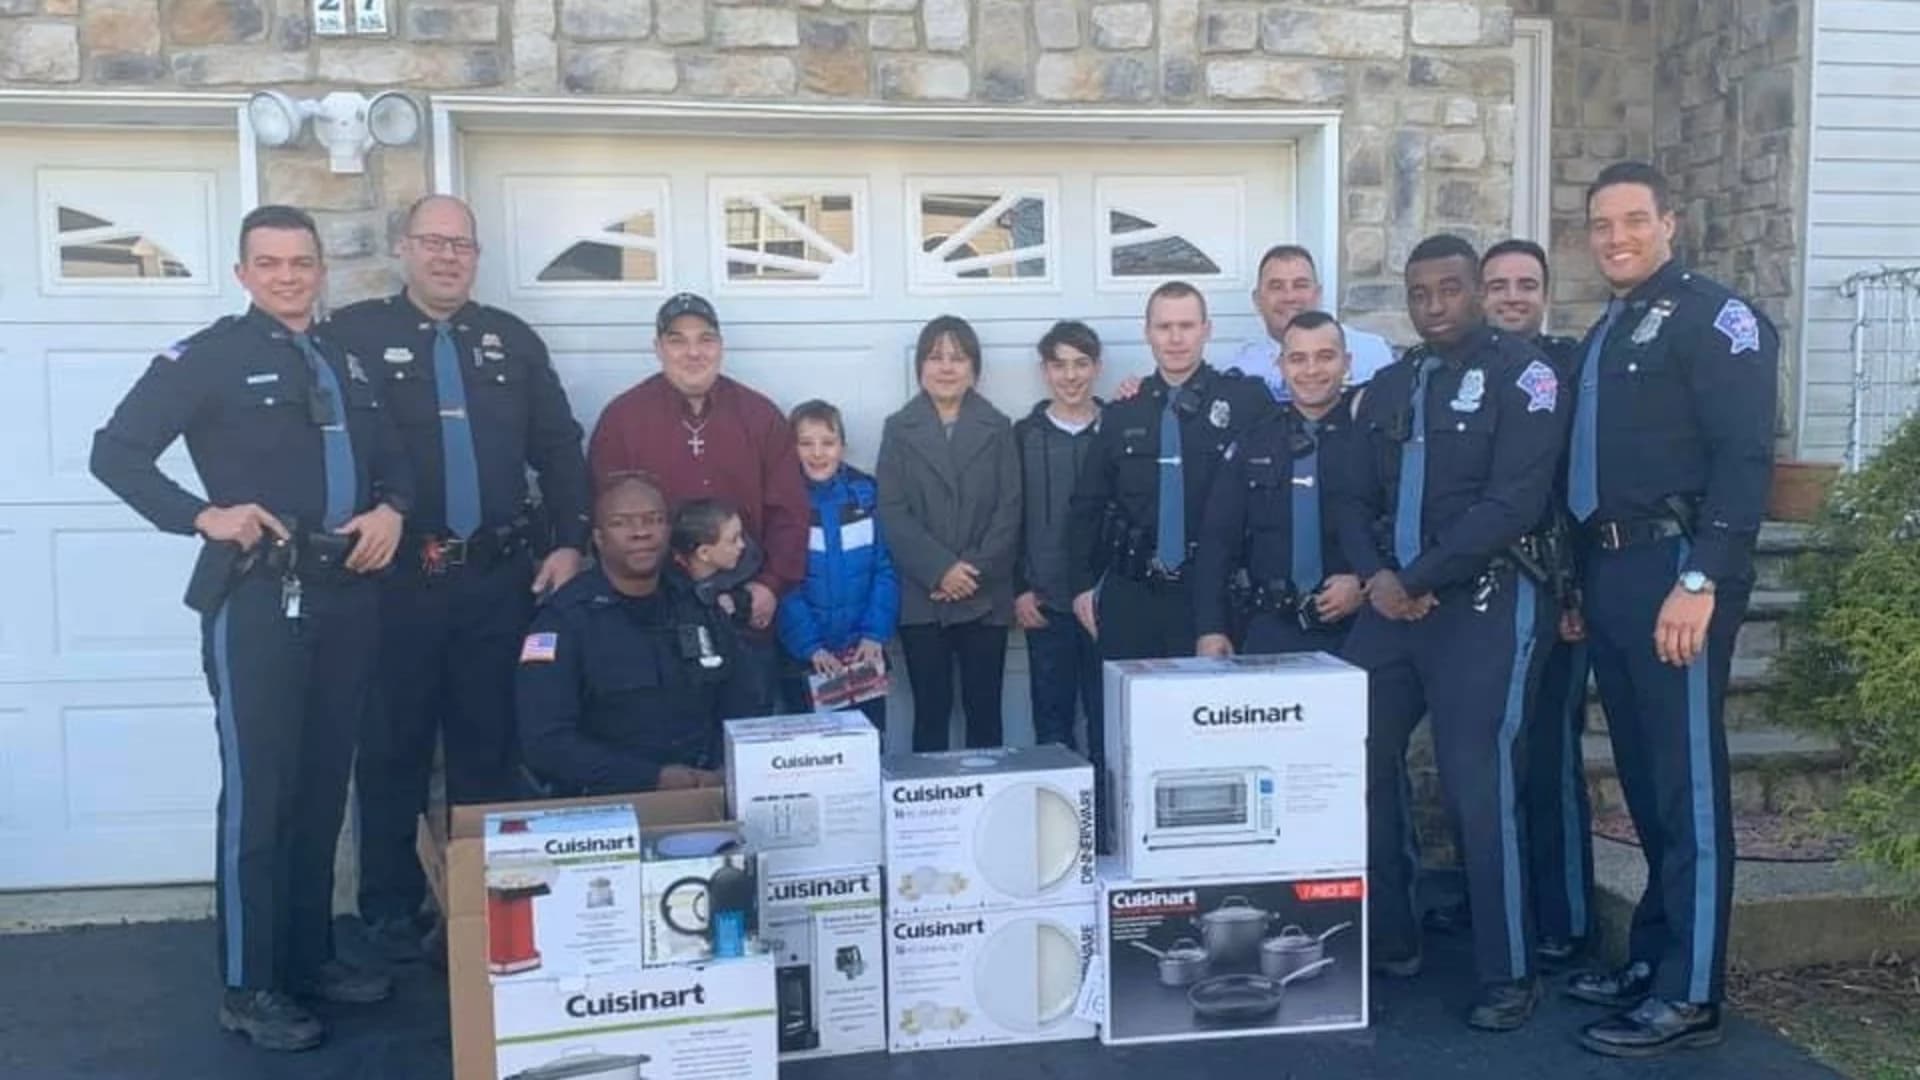 Marlboro Police Department adopts family in need for the holidays